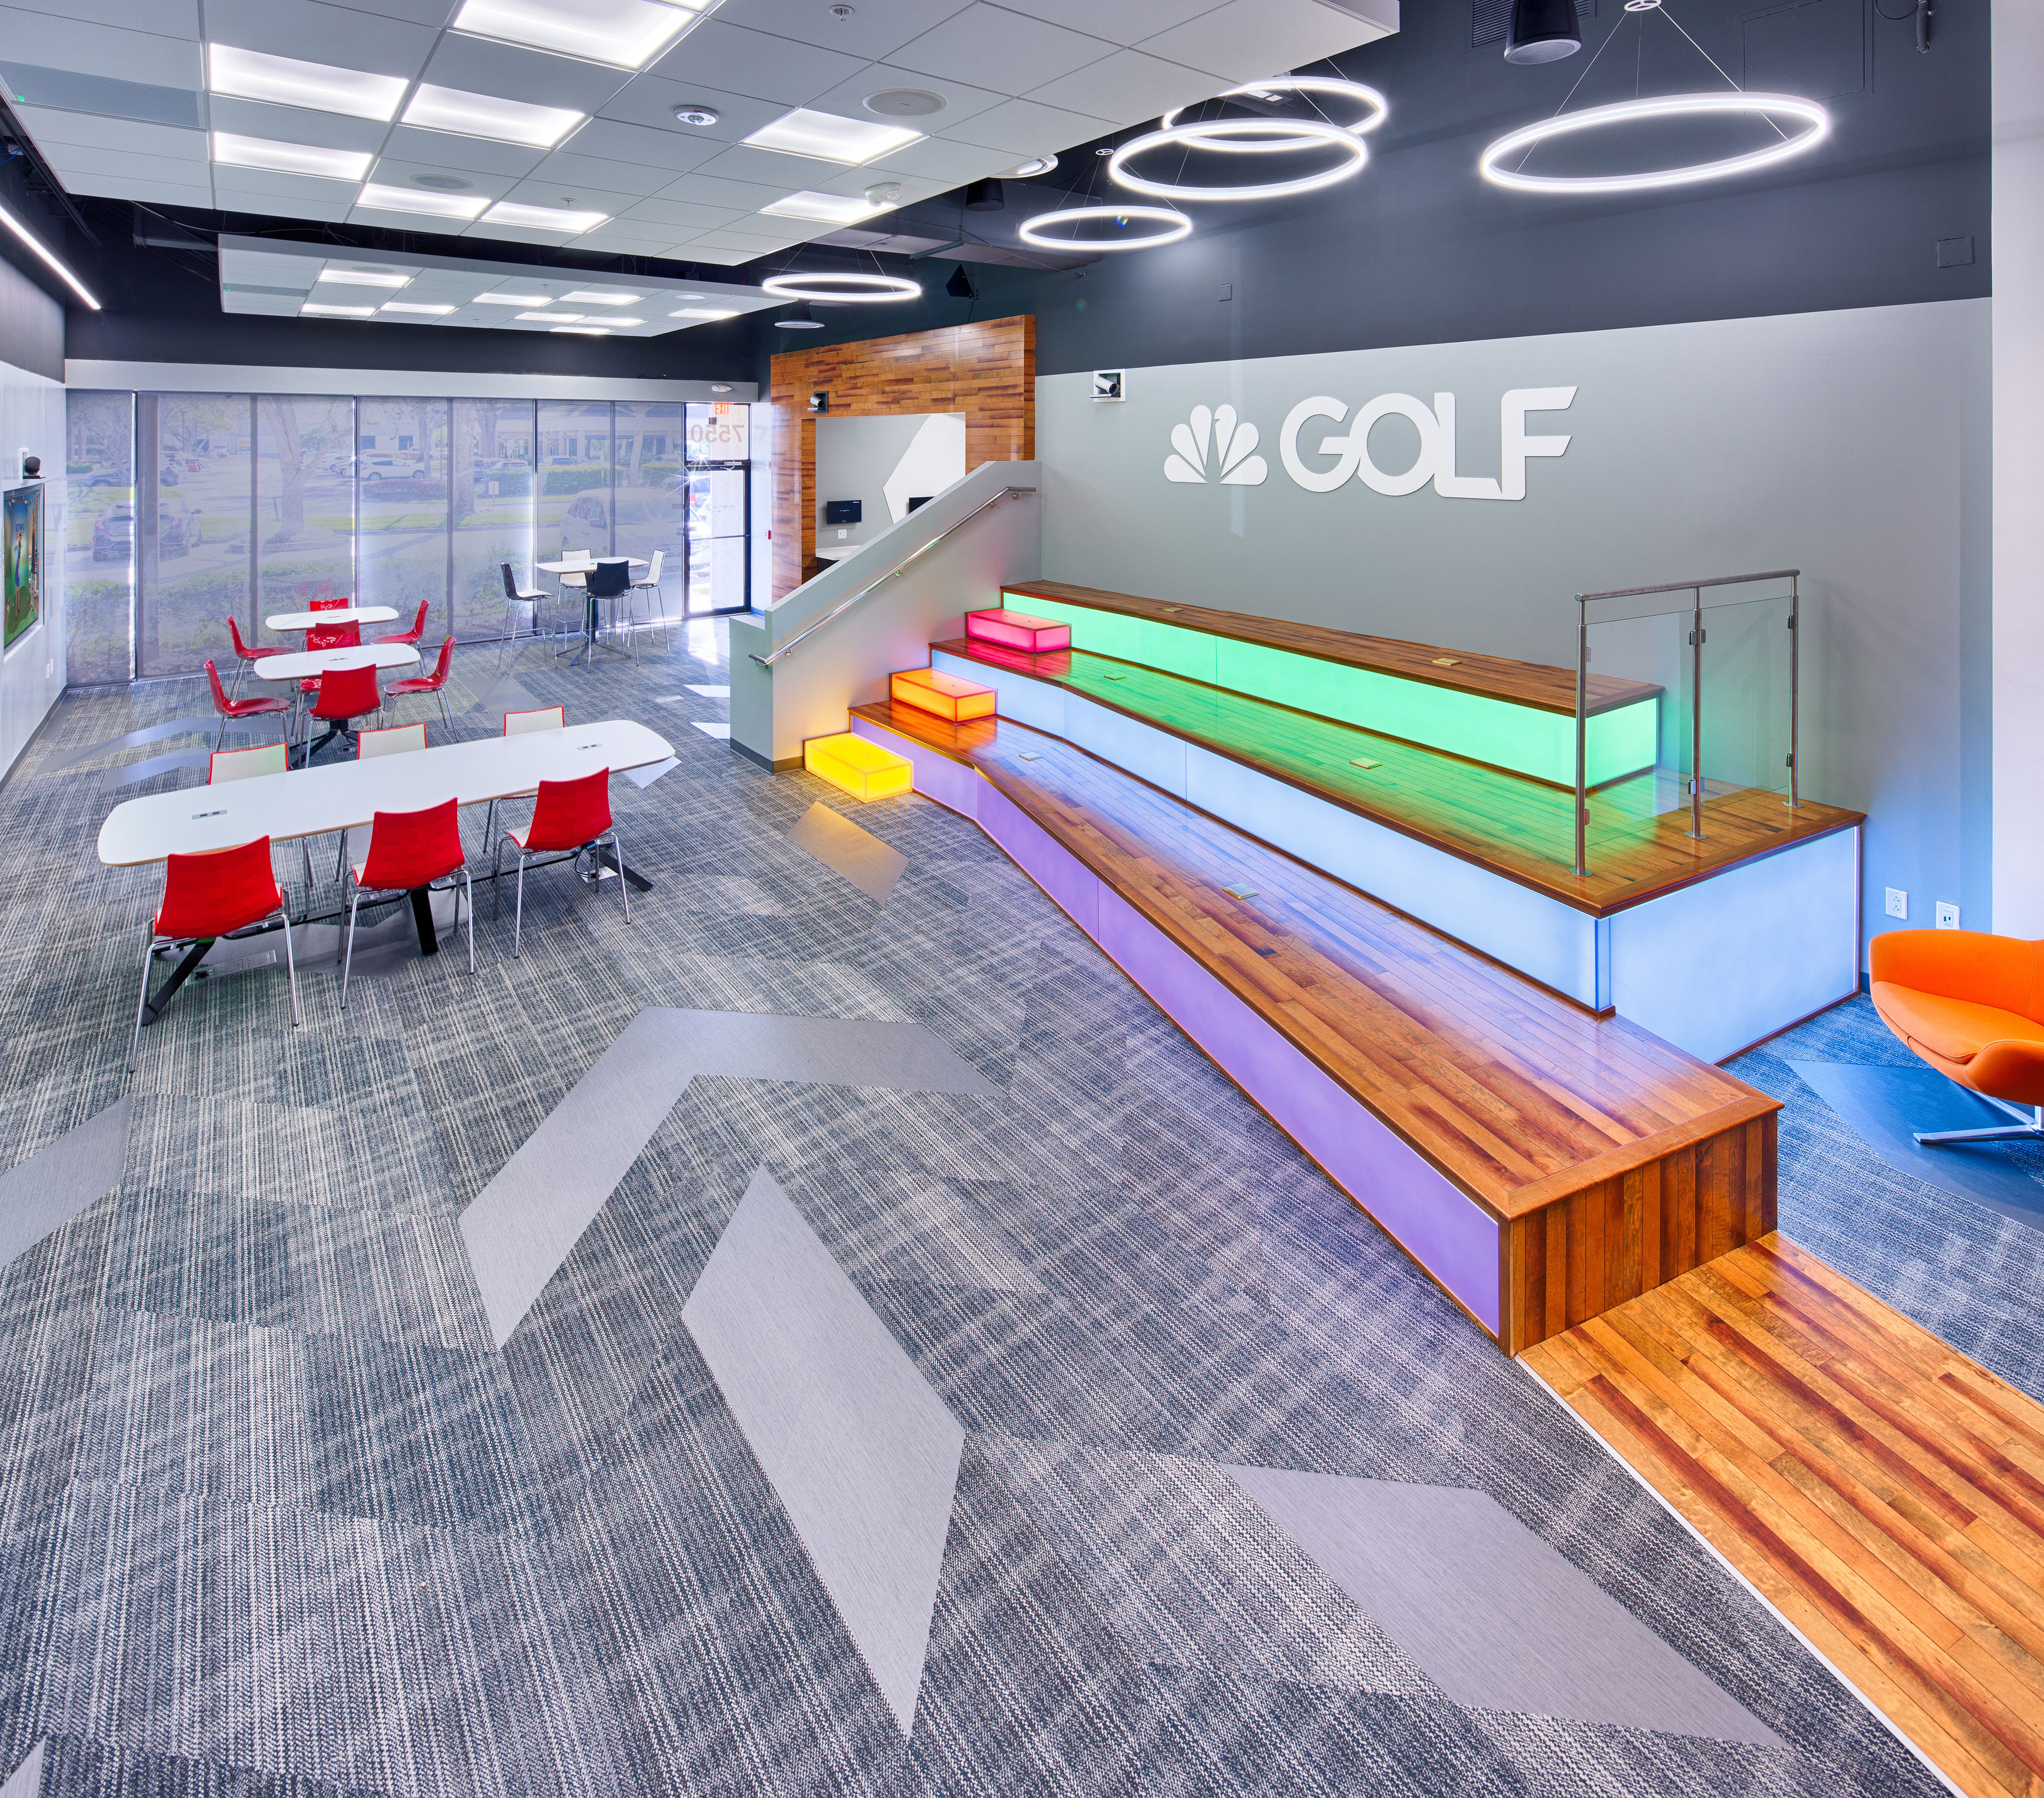 The Golf Channel needed a multi-function, flexible space for 